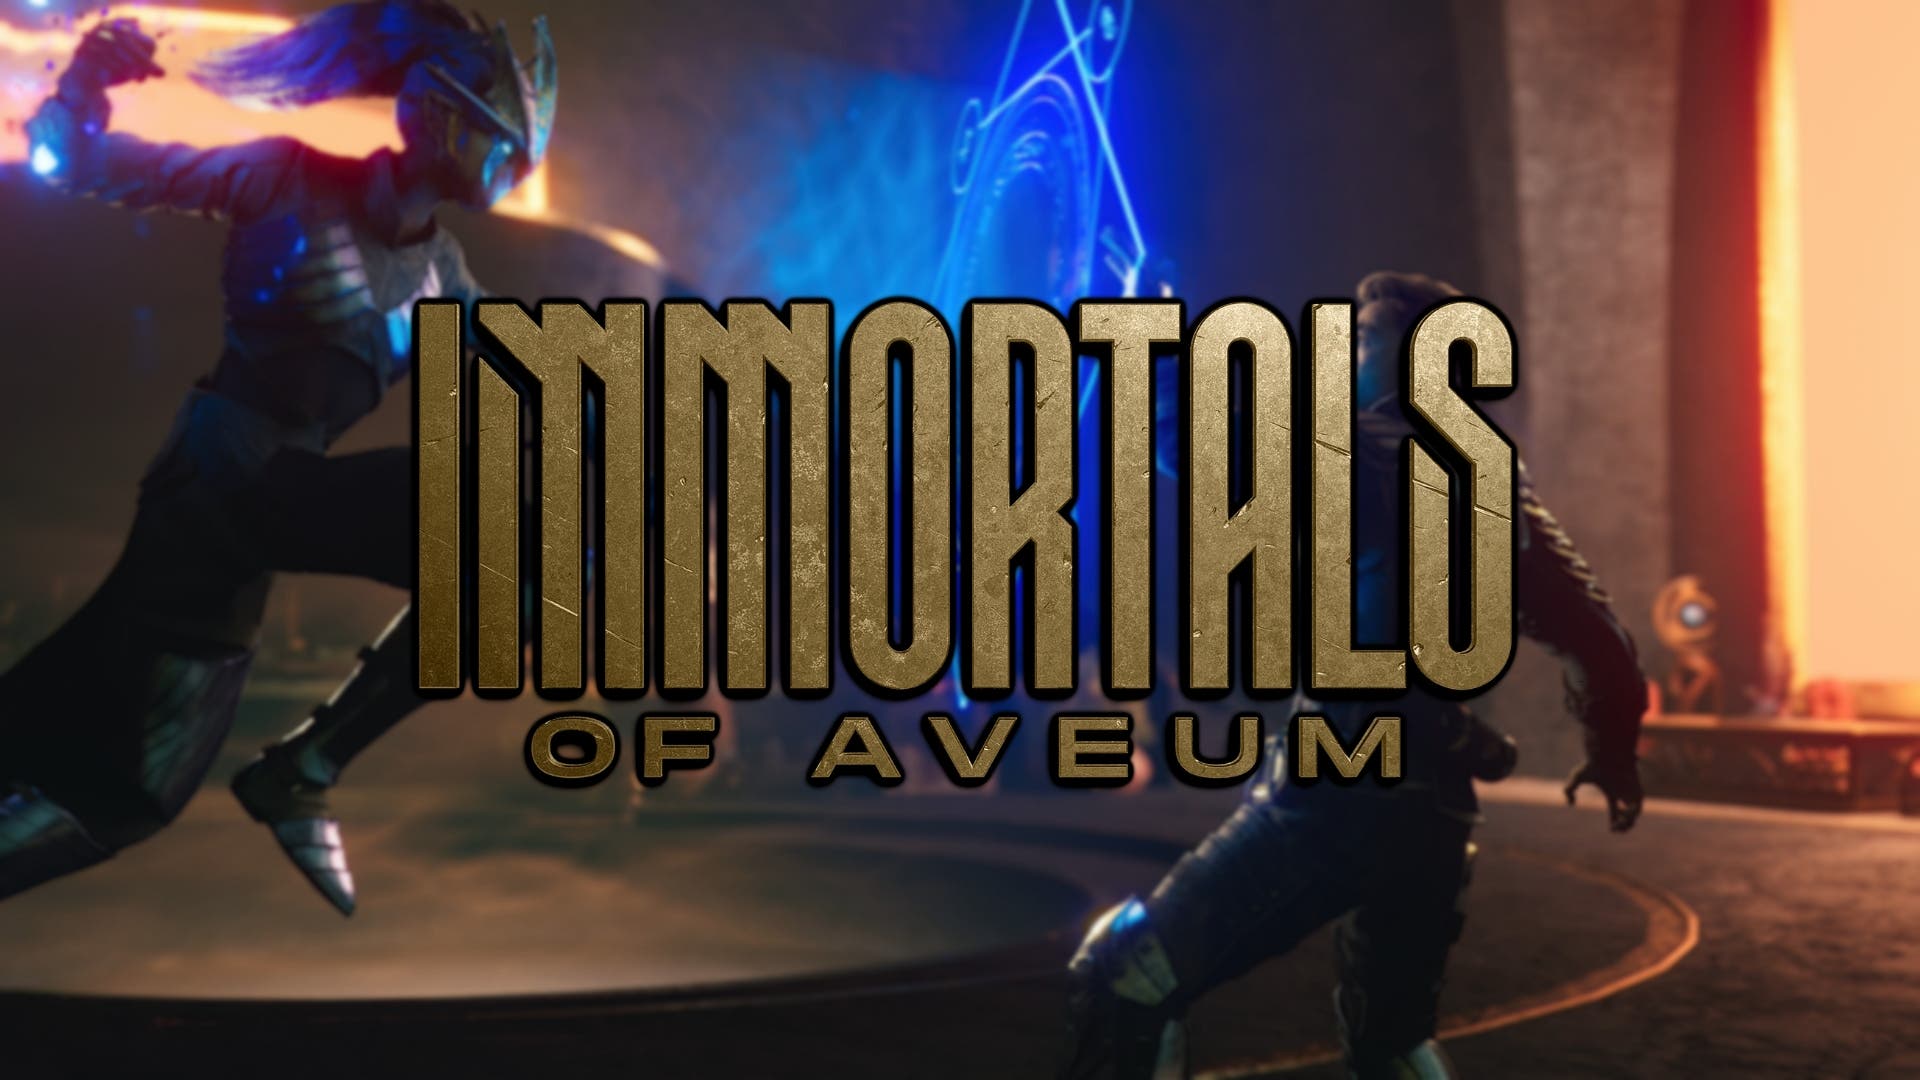 Immortals of Aveum, ‘the Call of Duty with magic’, shines in its first gameplay trailer